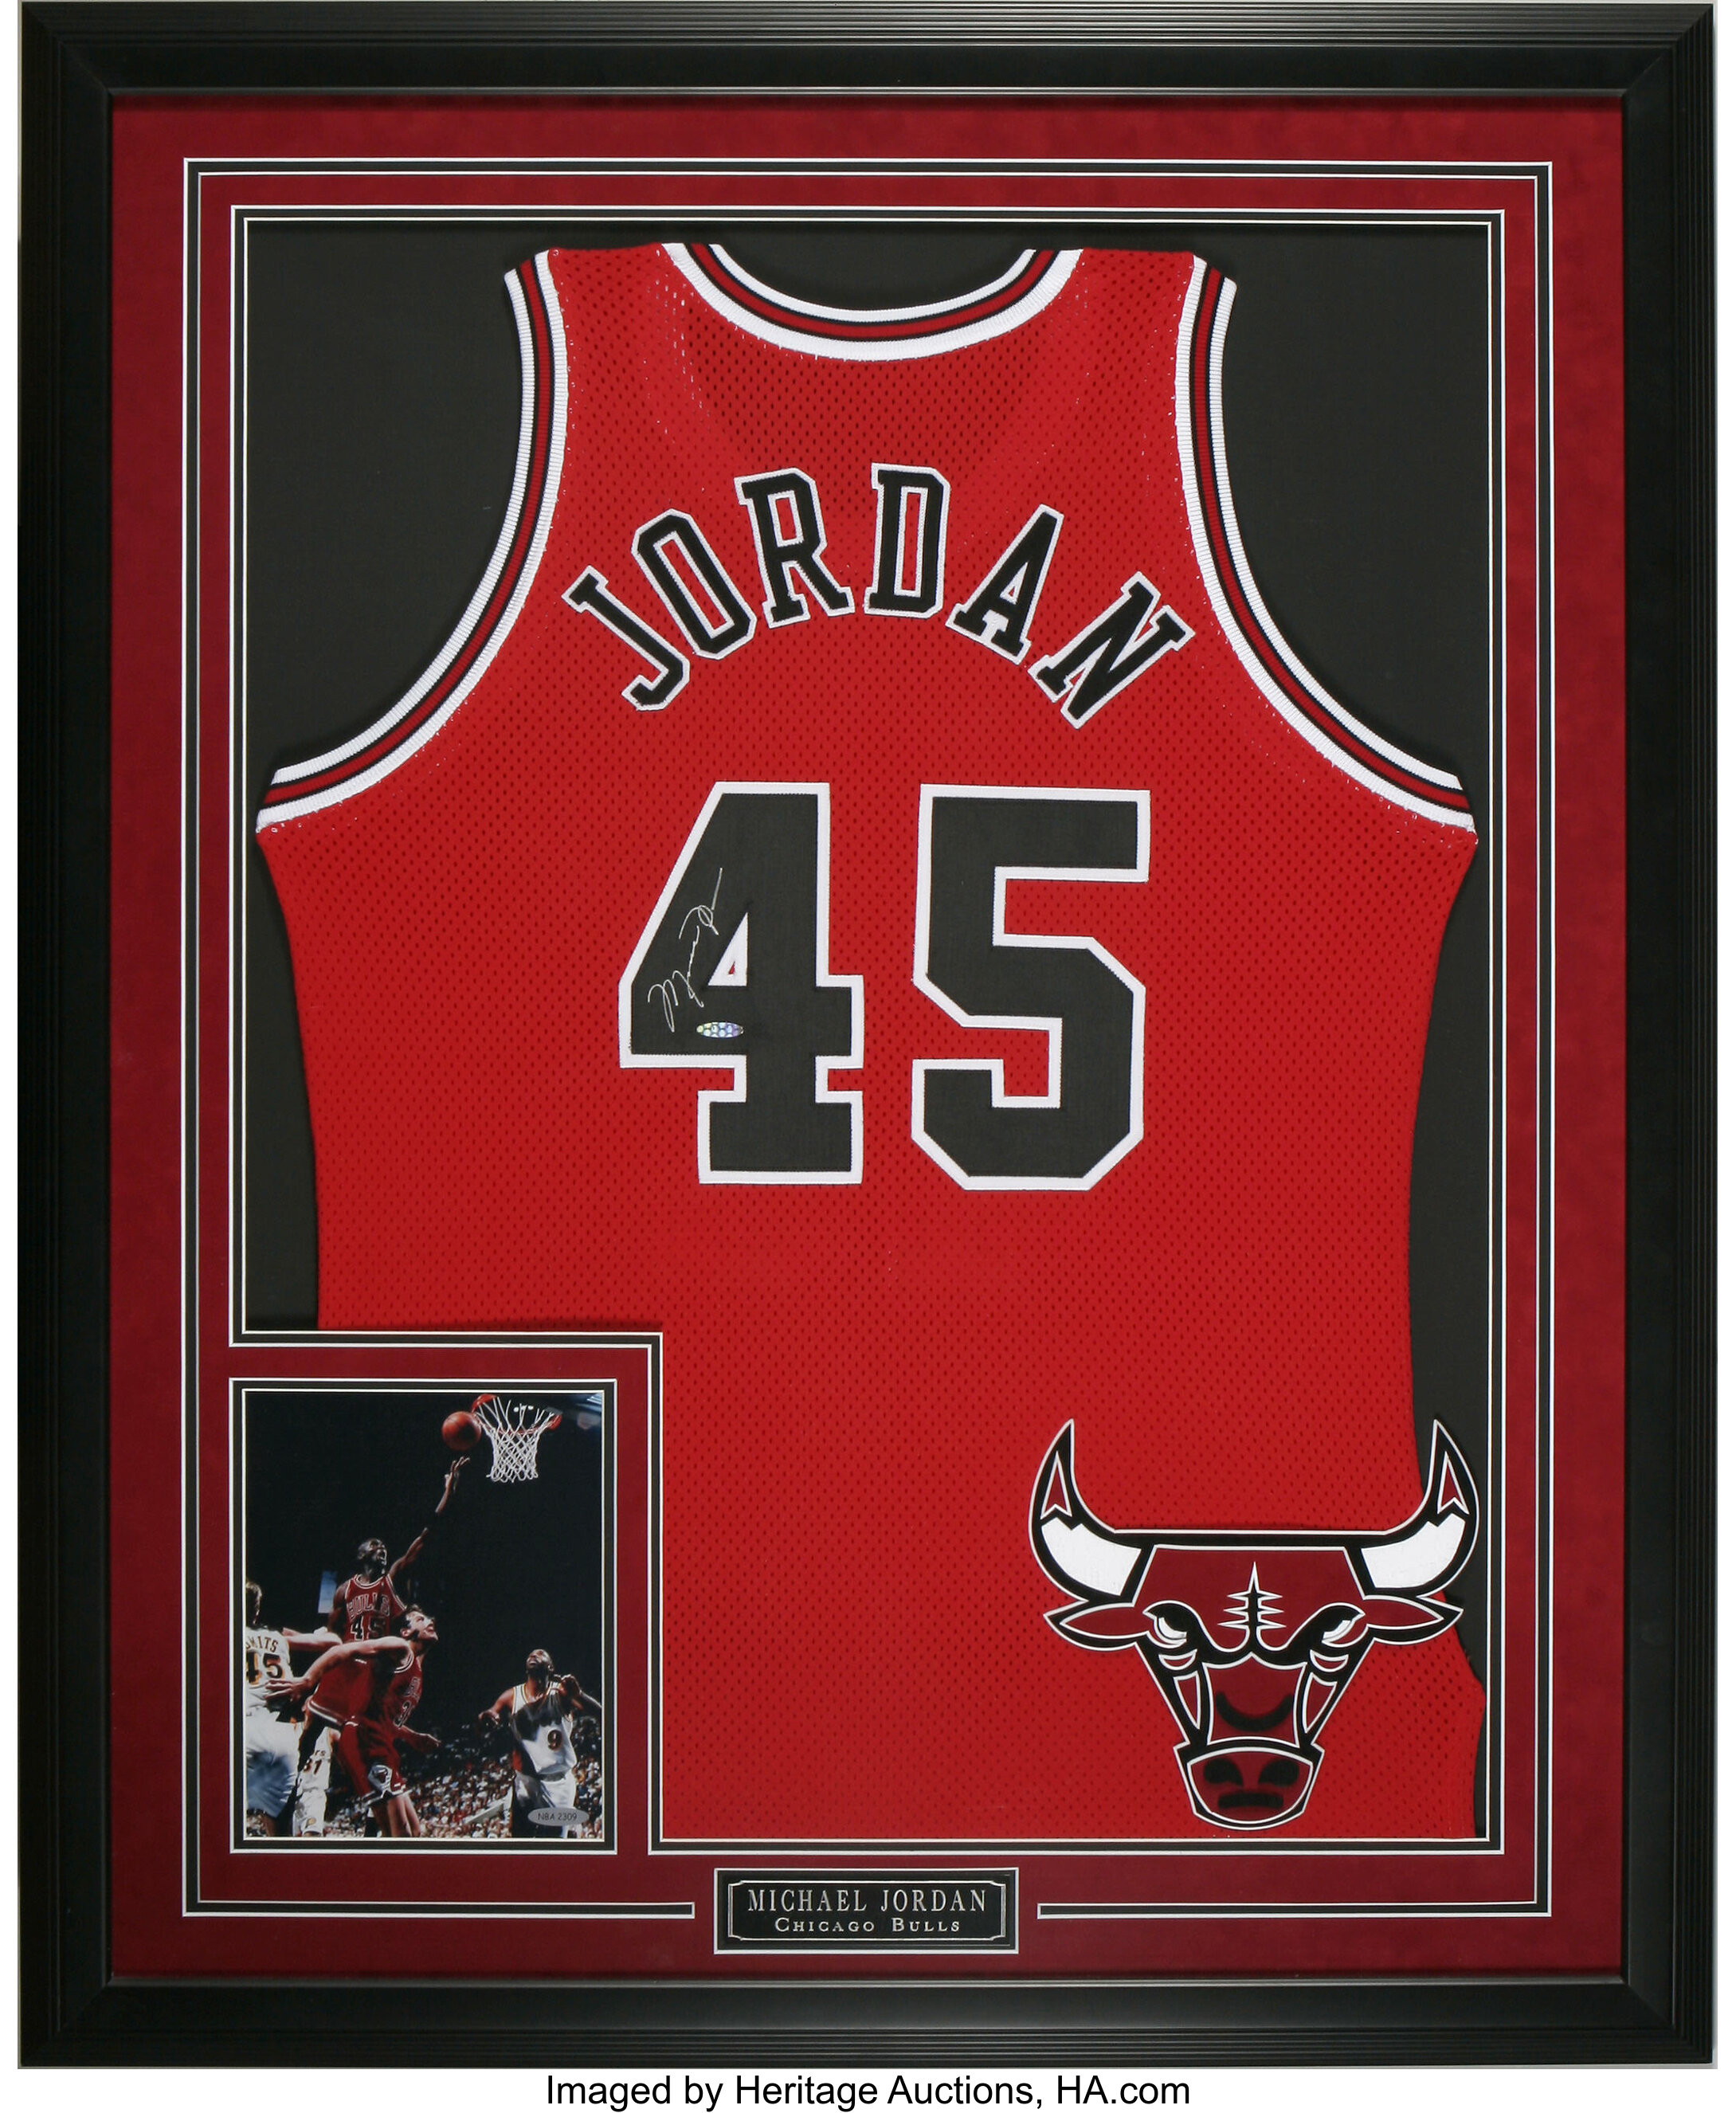 Michael Jordan's number 45 jersey to go on sale